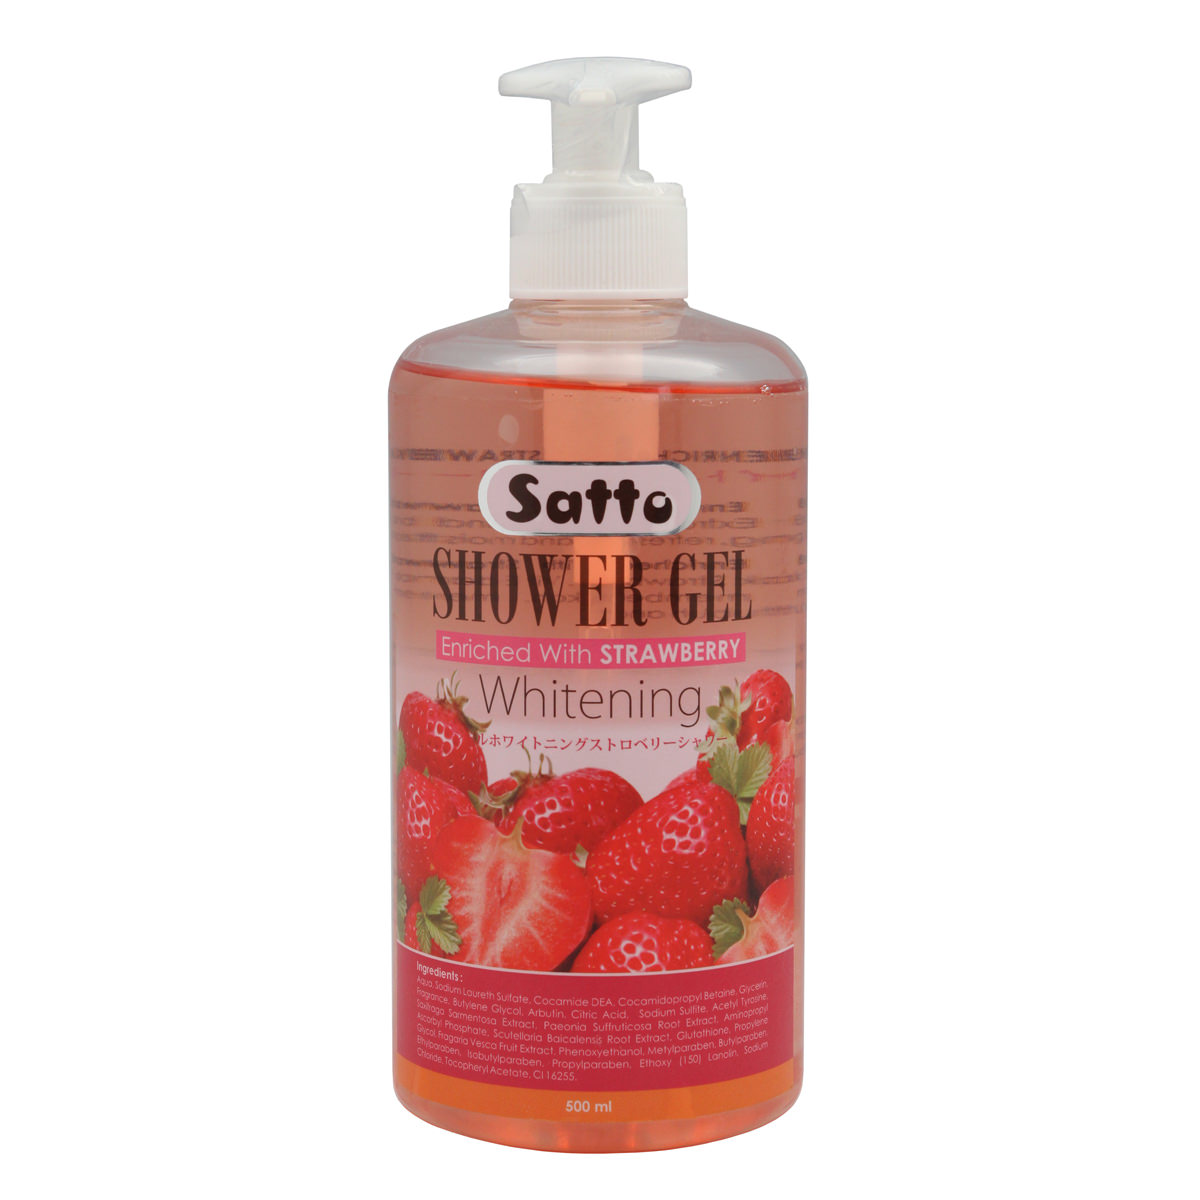 Satto-Shower-Gel-Enriched-with-Strawberry-Whitening-(500-ml)-high-sfw